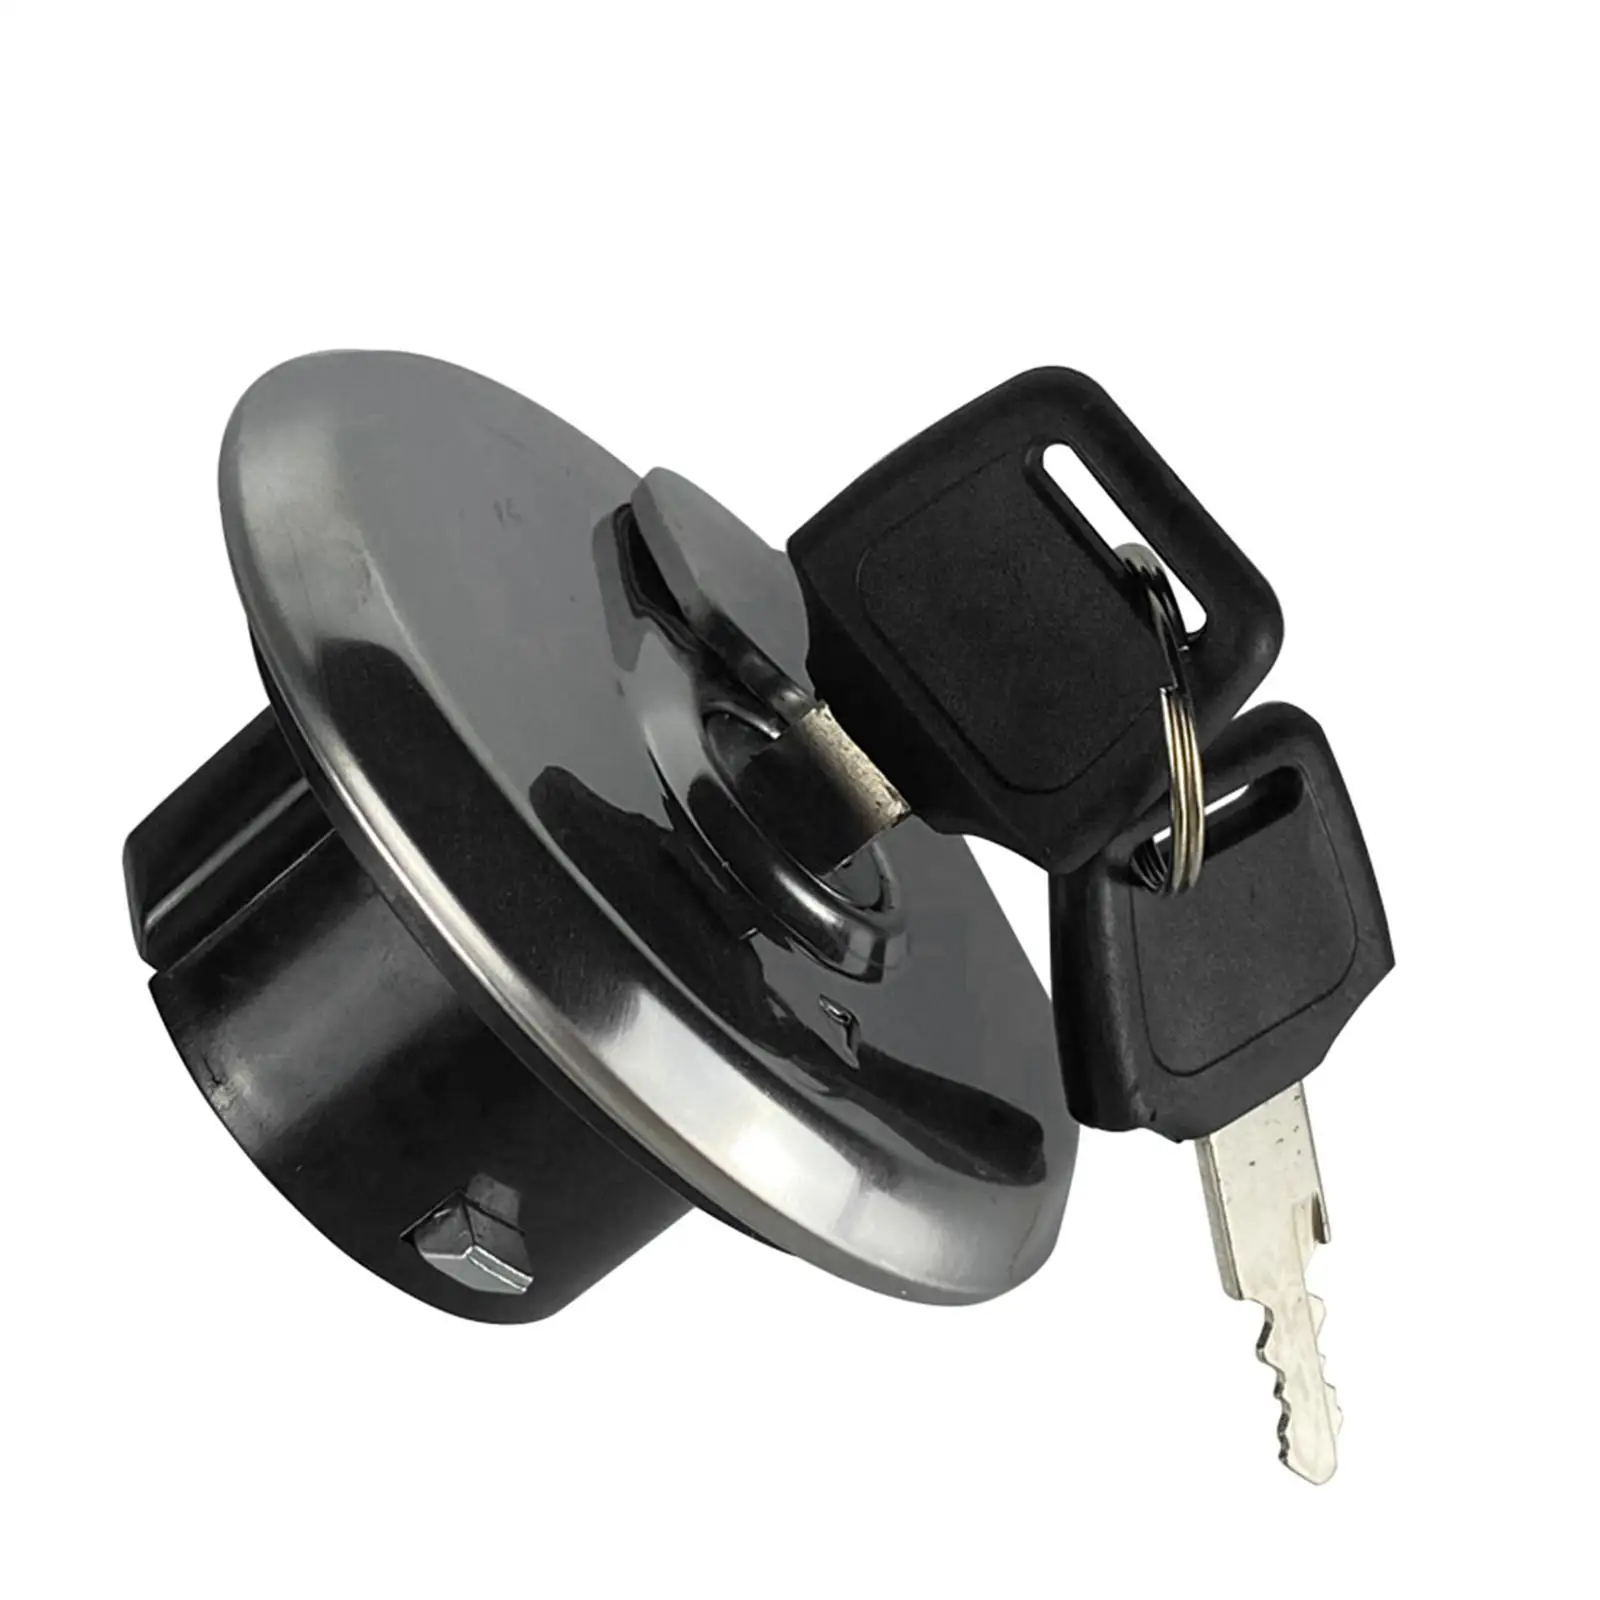 Motorcycle Fuel Gas Tank Cap Cover with Keys for Suzuki Gn125 Durable Parts